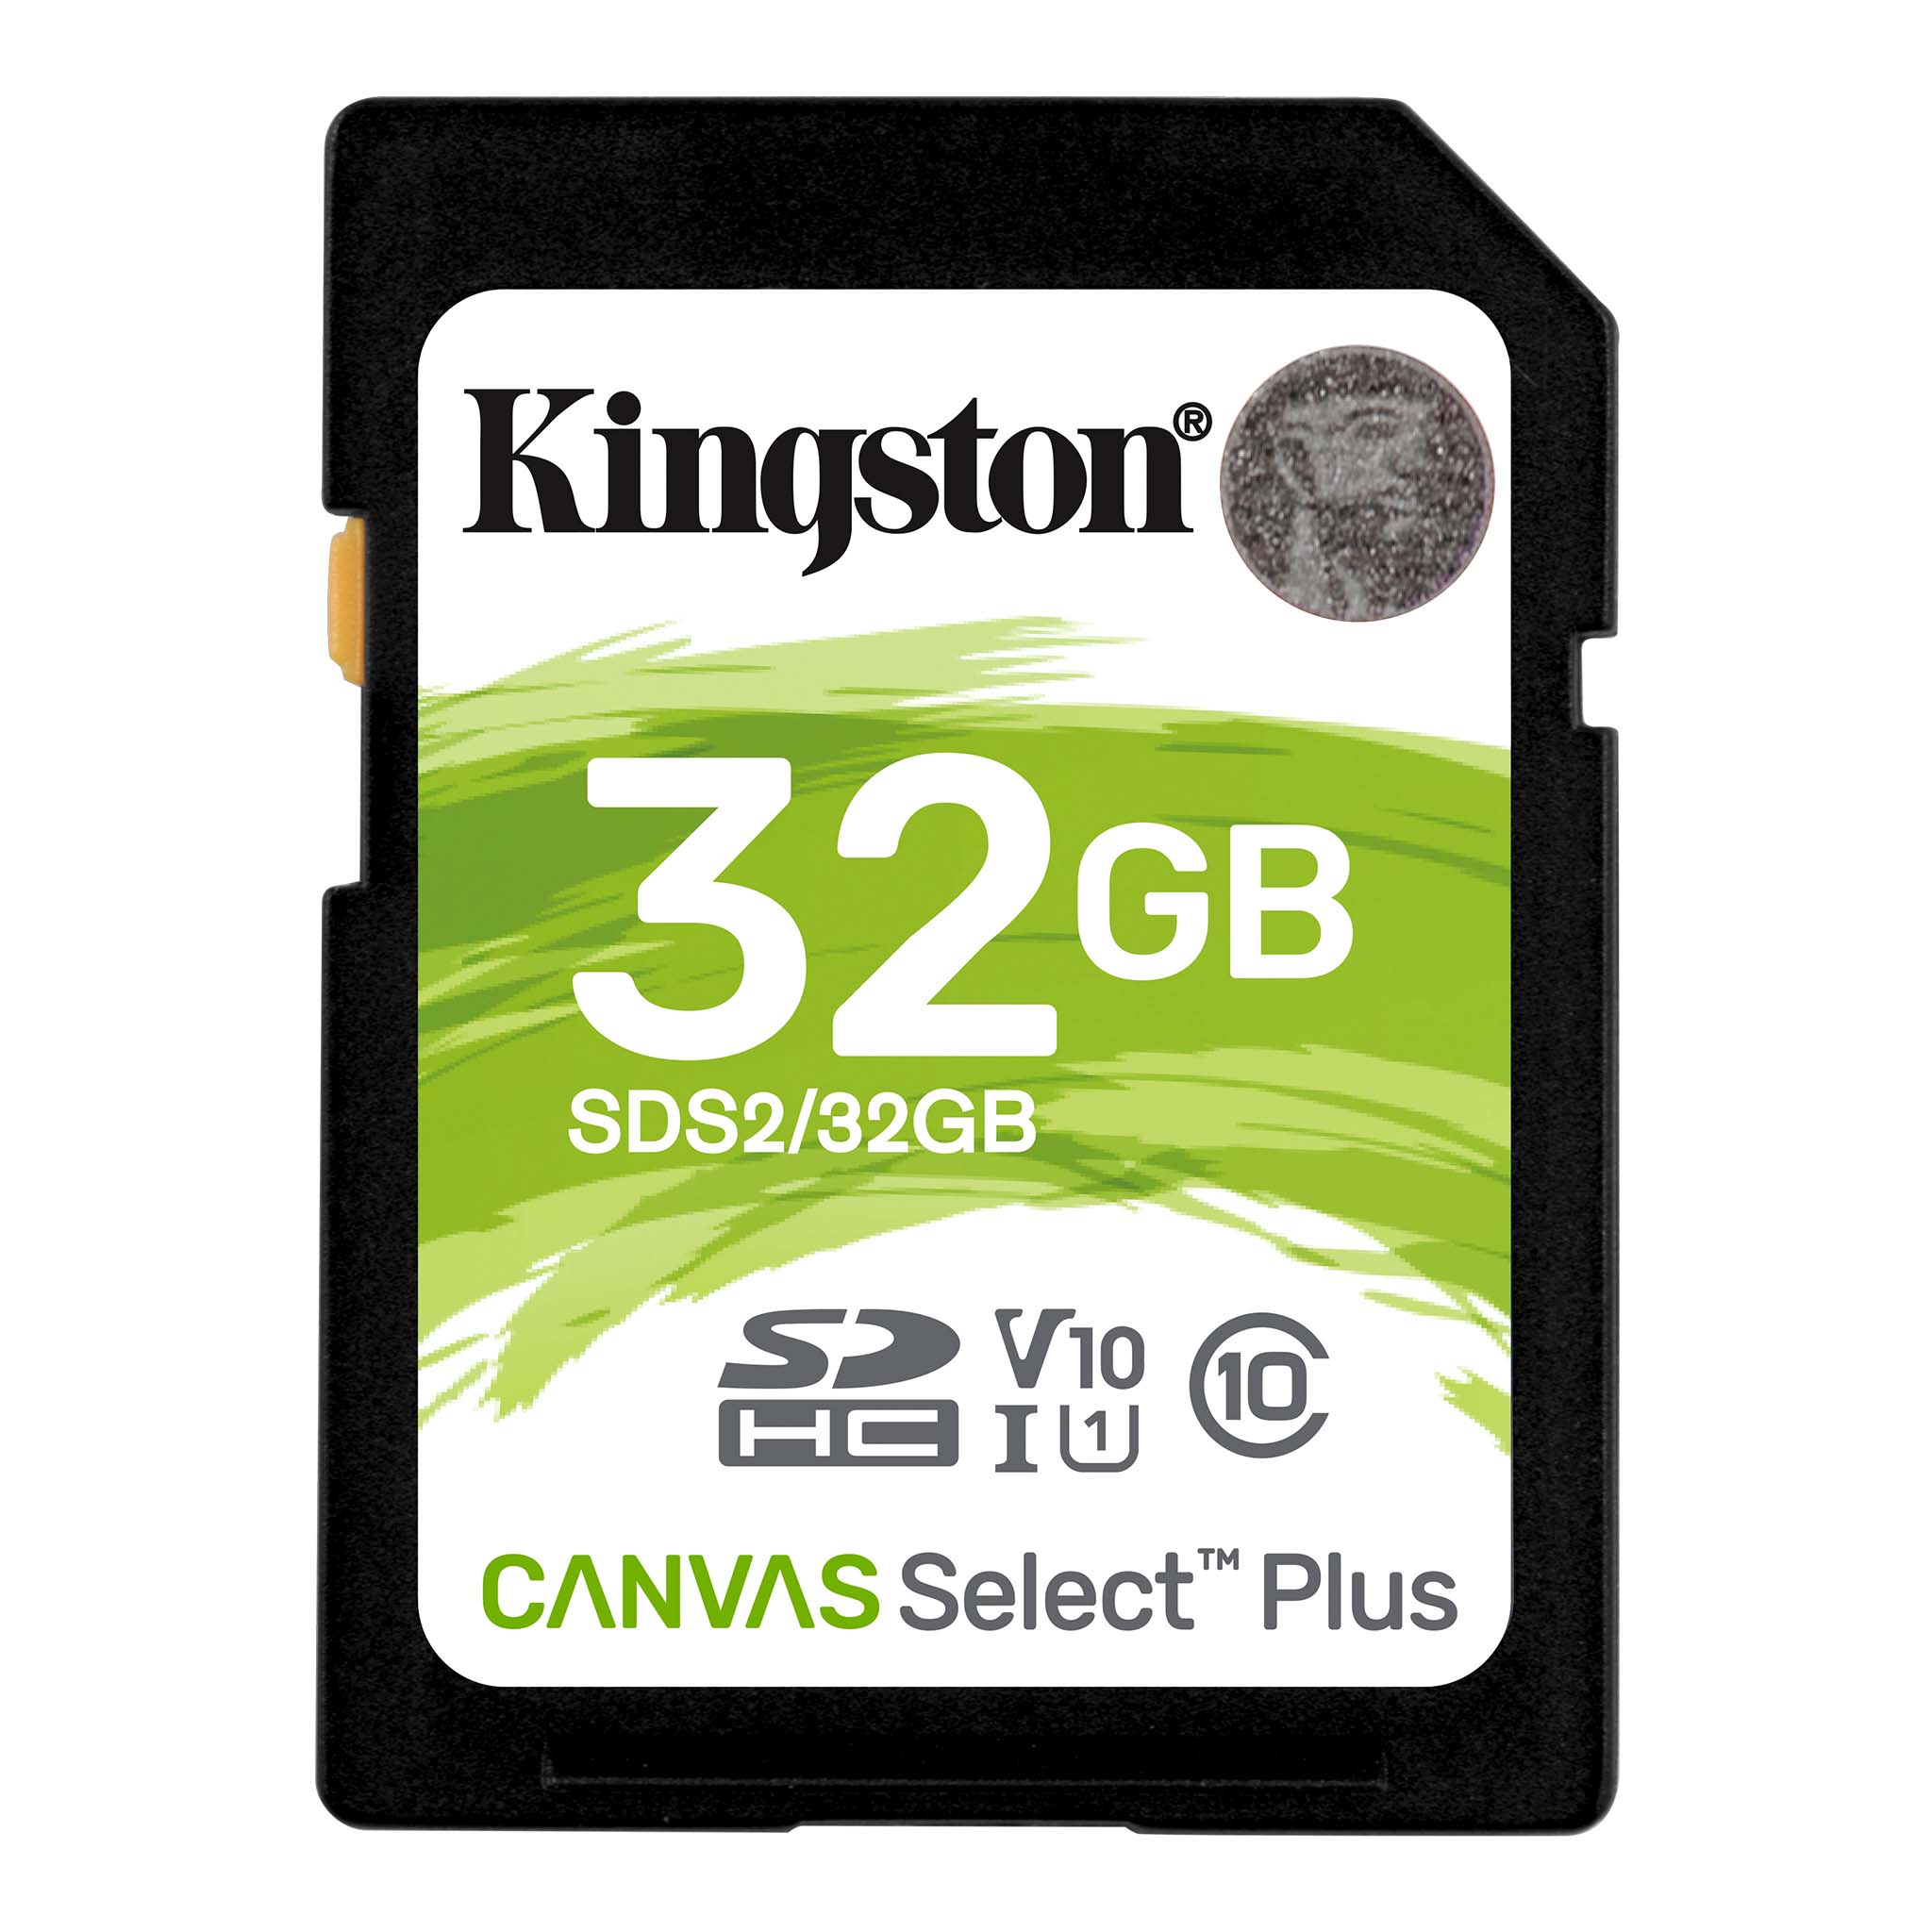 Kingston 128GB Samsung N930 MicroSDXC Canvas Select Plus Card Verified by SanFlash. 100MBs Works with Kingston 